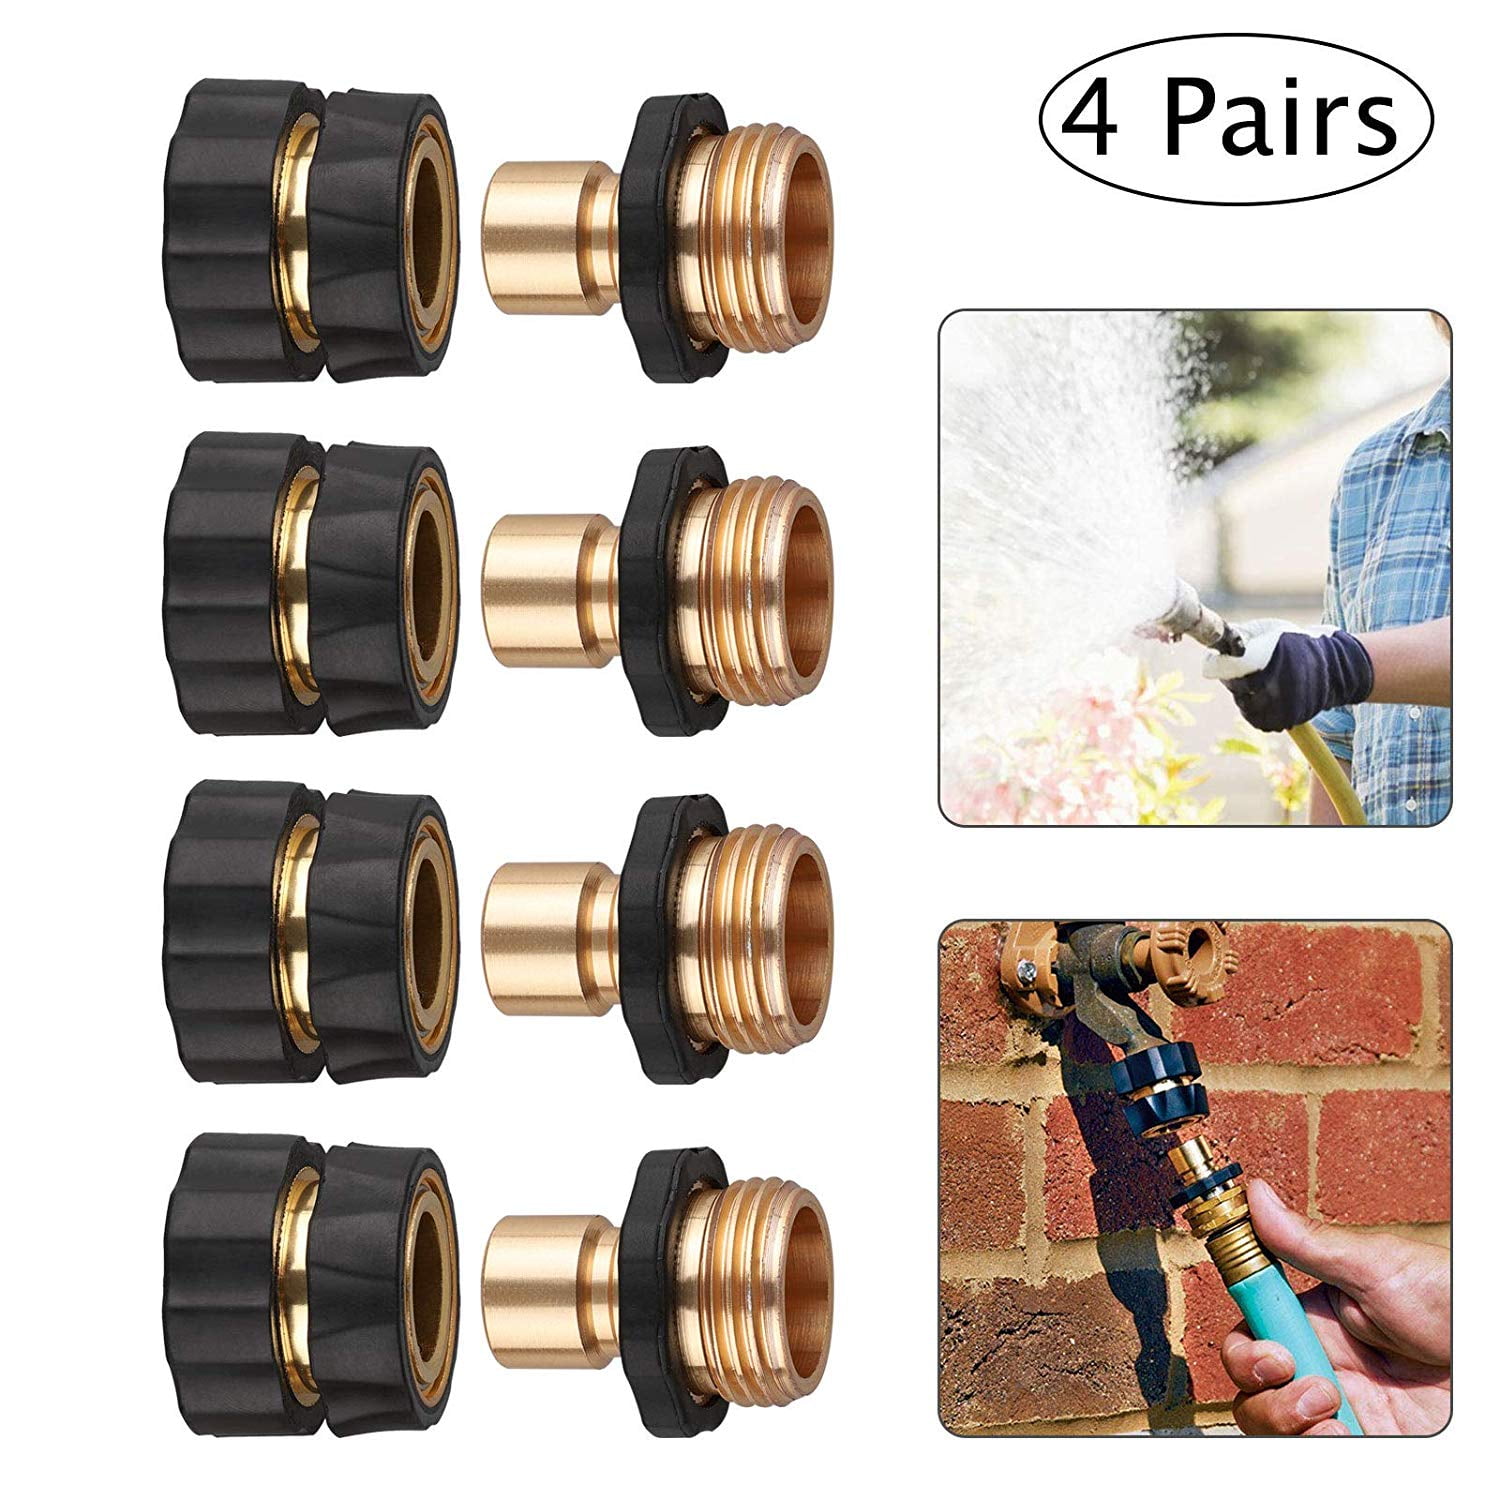 Brass Connector Set Garden Kit Water Hose Lock Quick Connect Quick Release FAST 